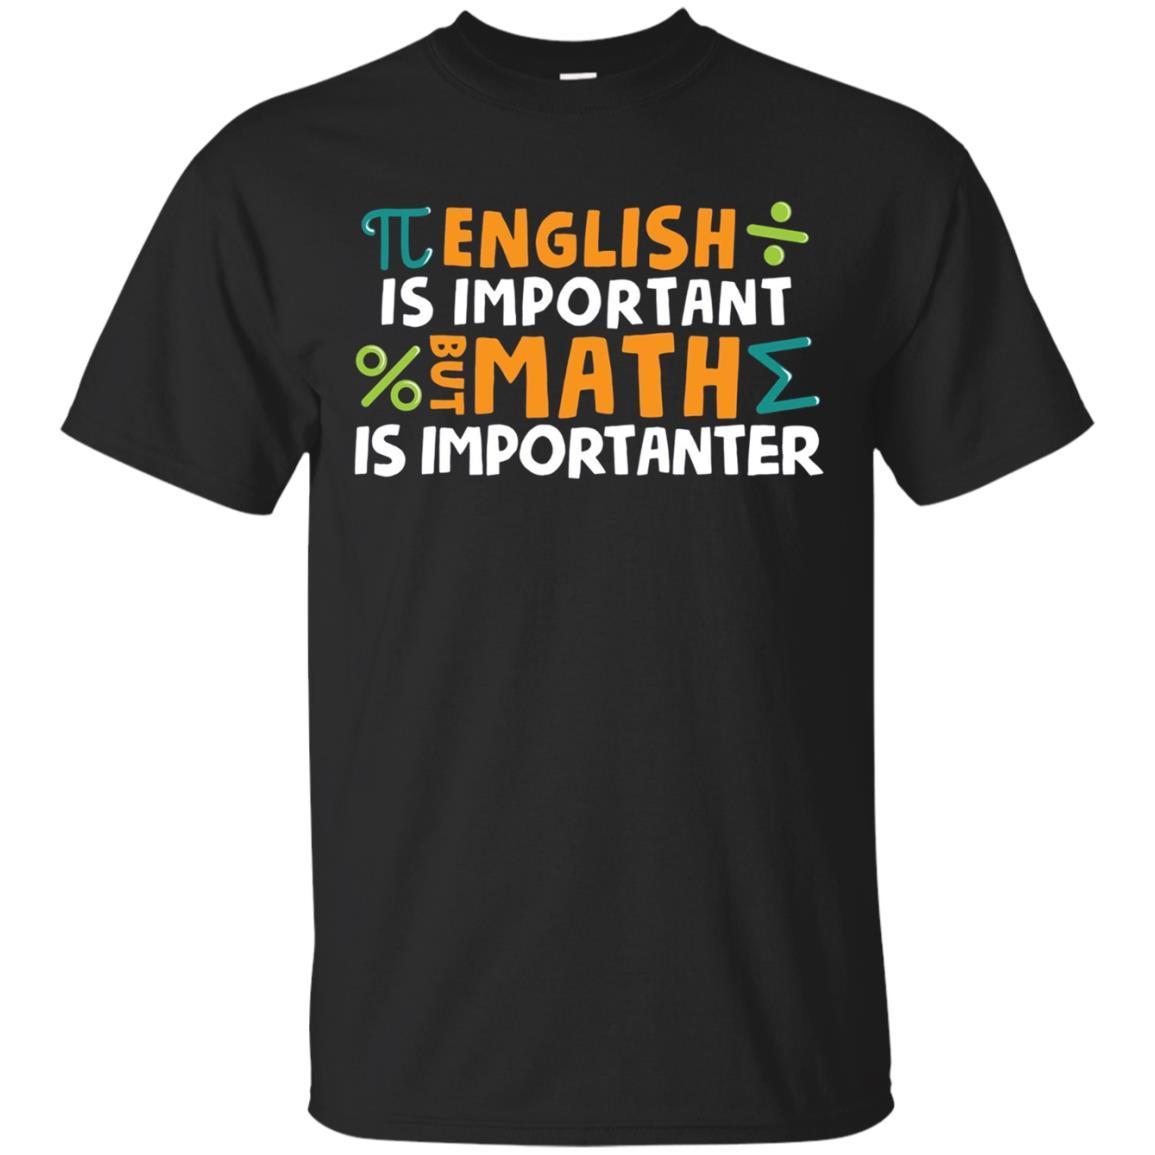 Funny English Is Important But Math Is Importanter T Shirt